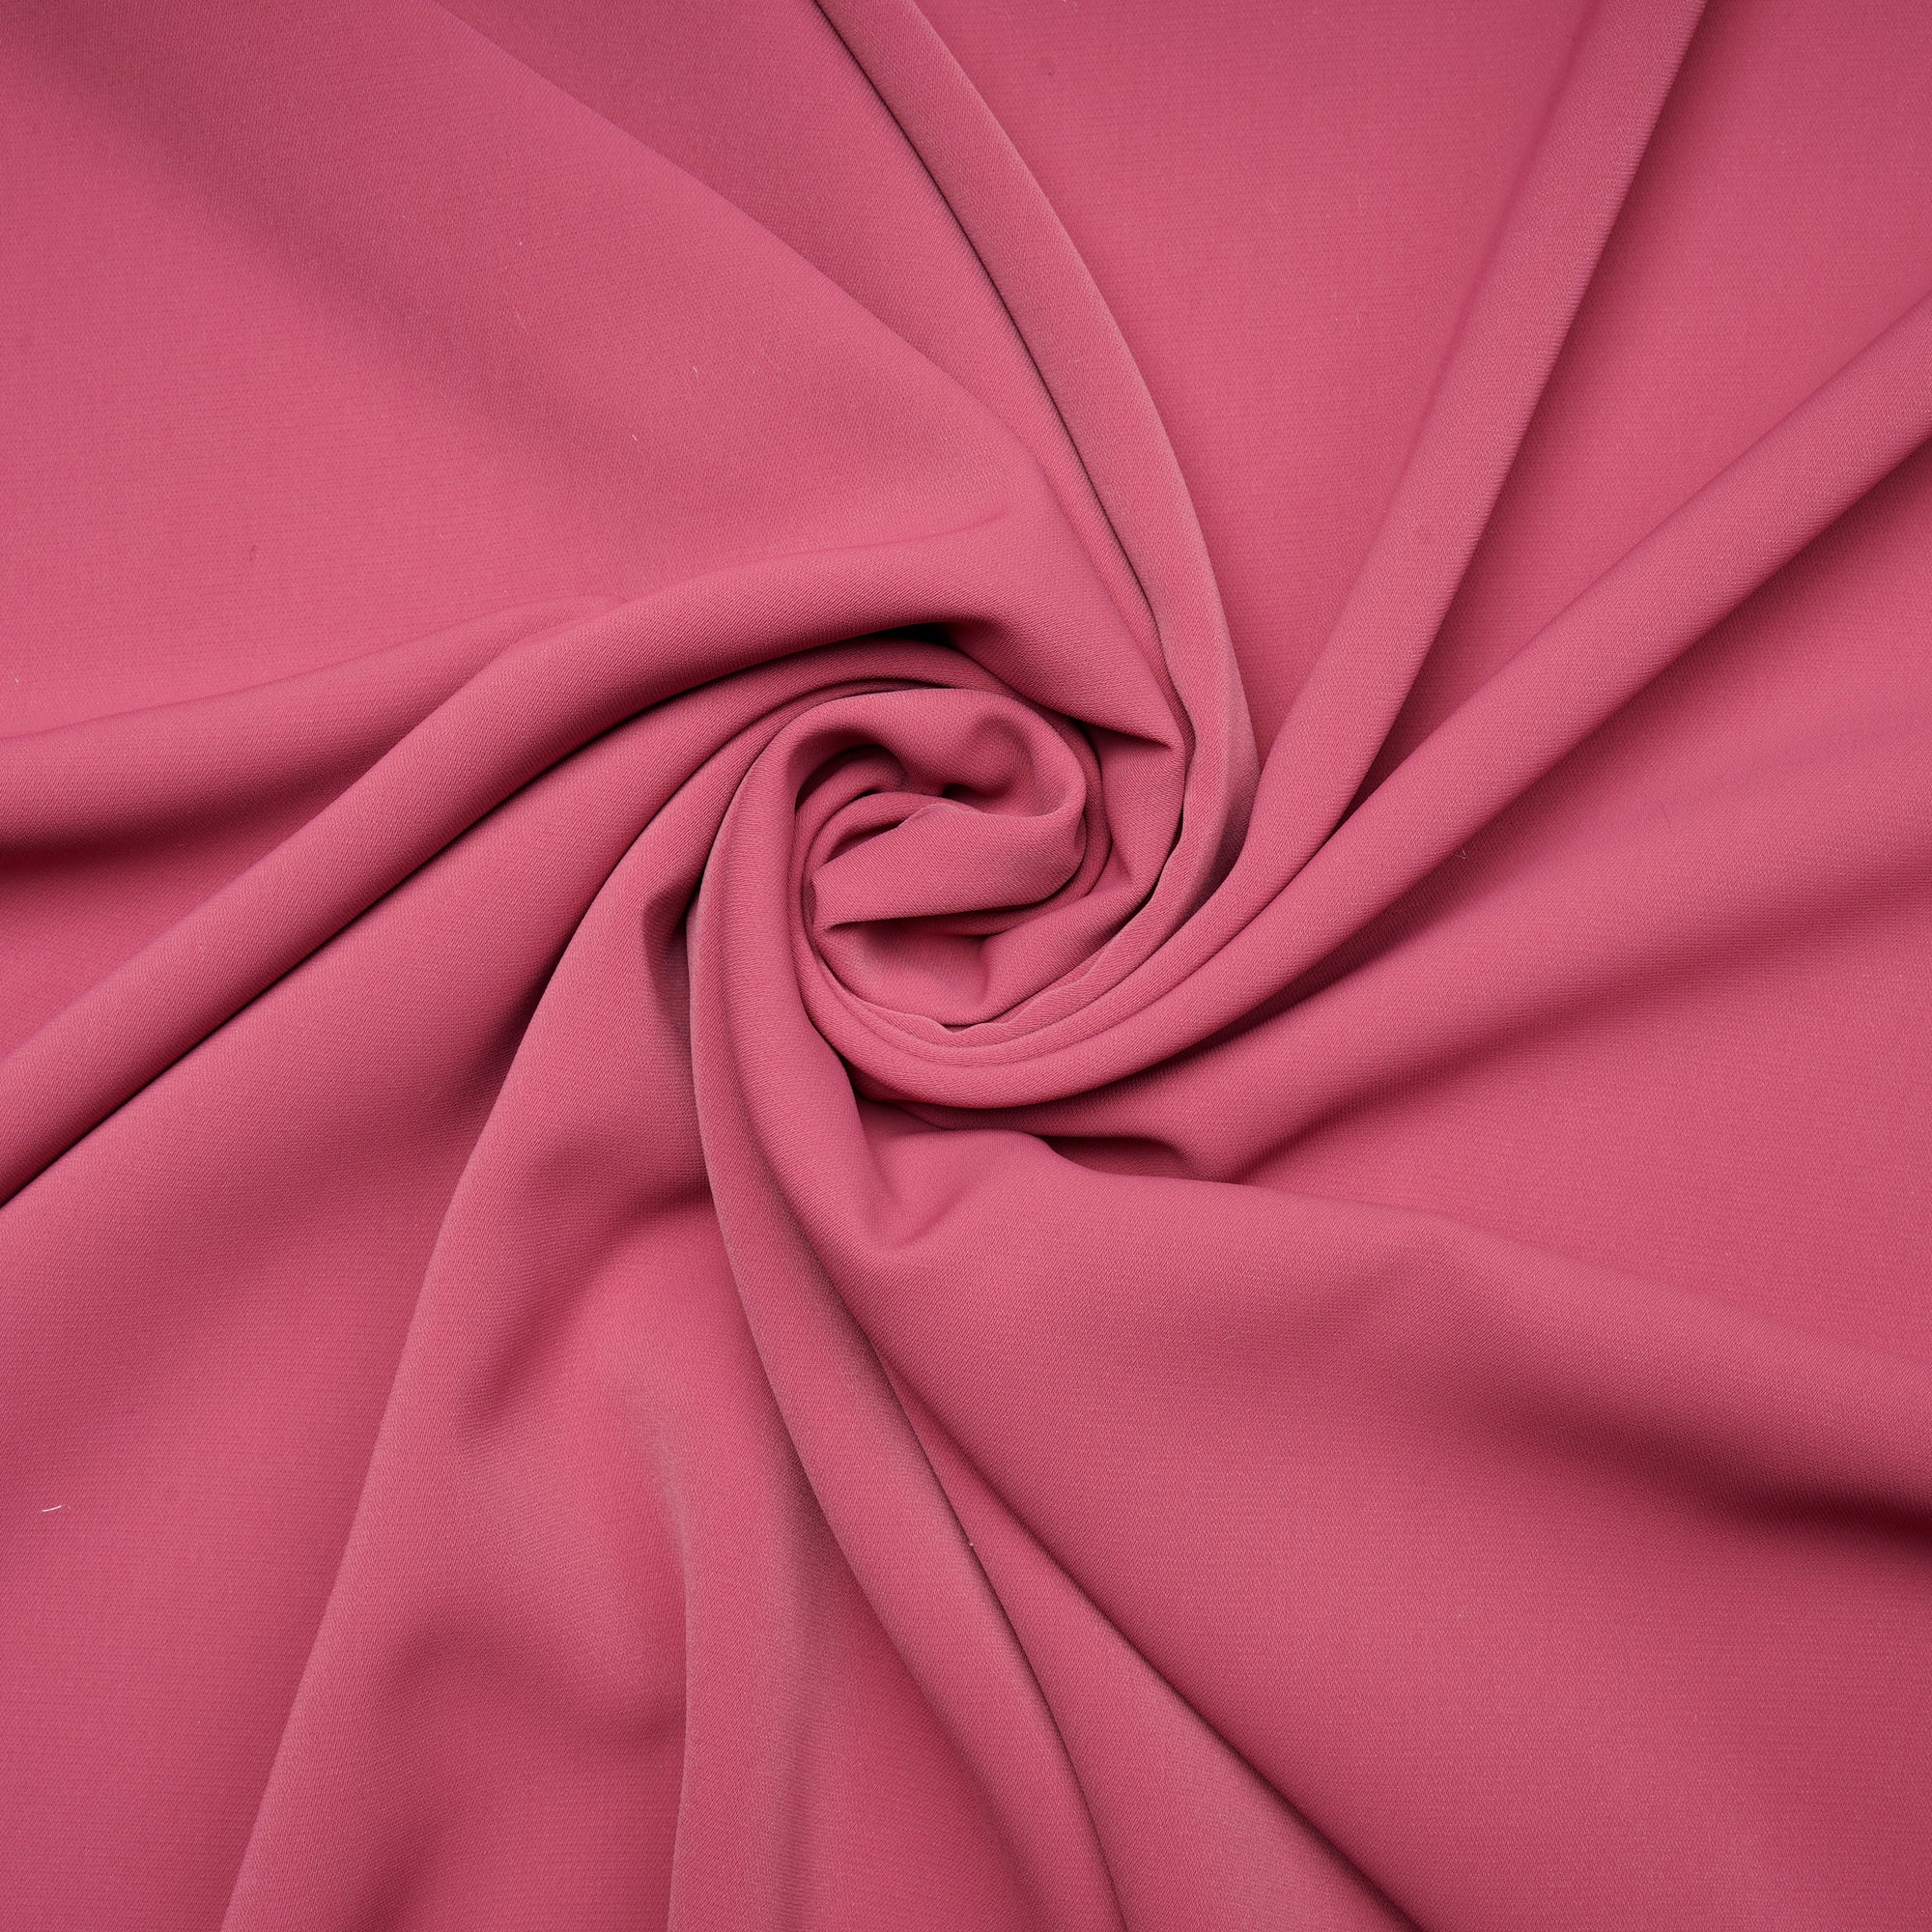 Buy Rapture Rose Solid Dyed Imported Angela Crepe Fabric (60